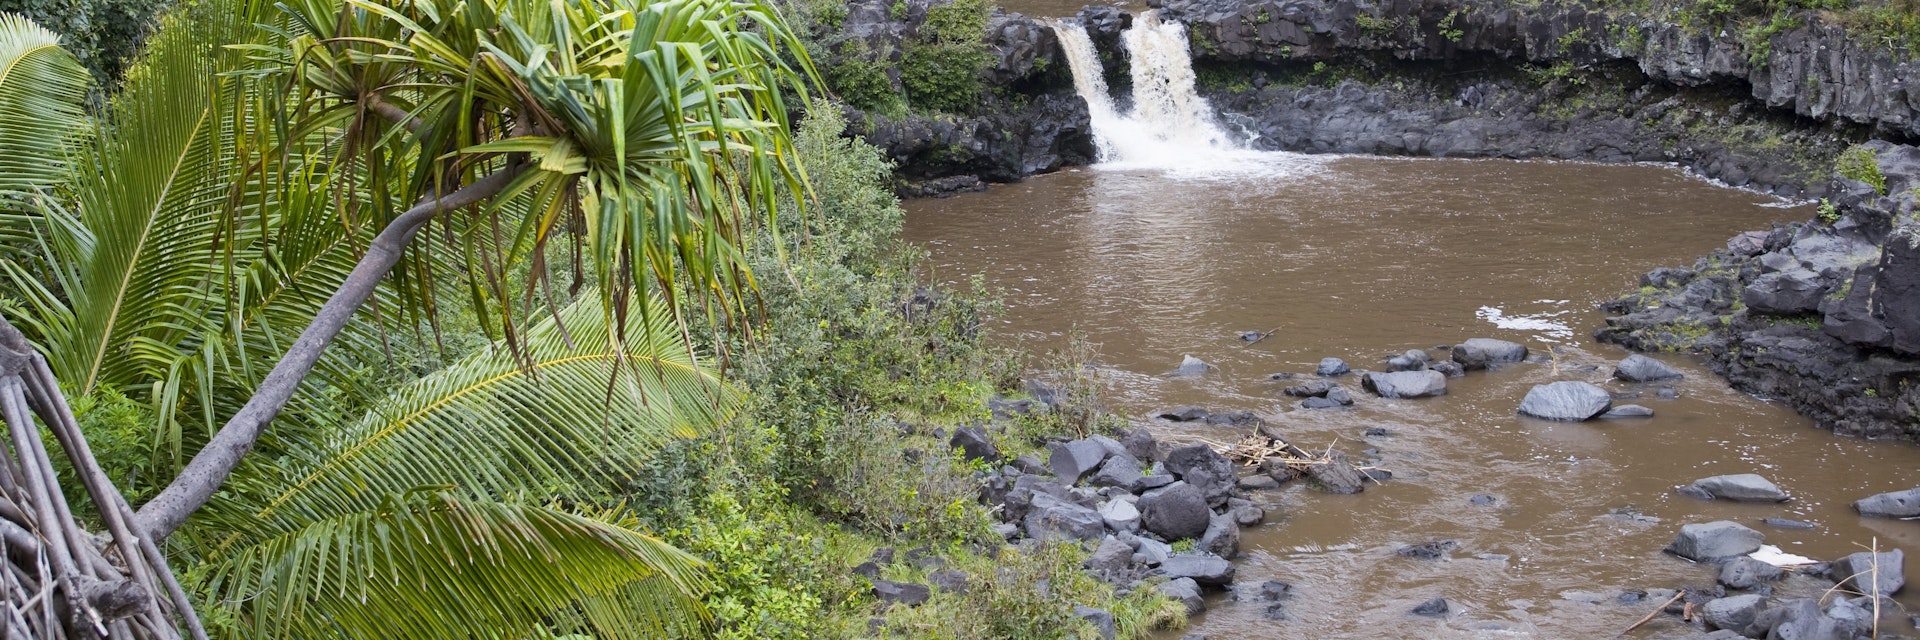 The pools of Oheo Gulch tinted brown due to an upcountry landslide and closed for swimming due to flash floods – requested pic was for swimmers in the pools. East Maui, beyond Hana.